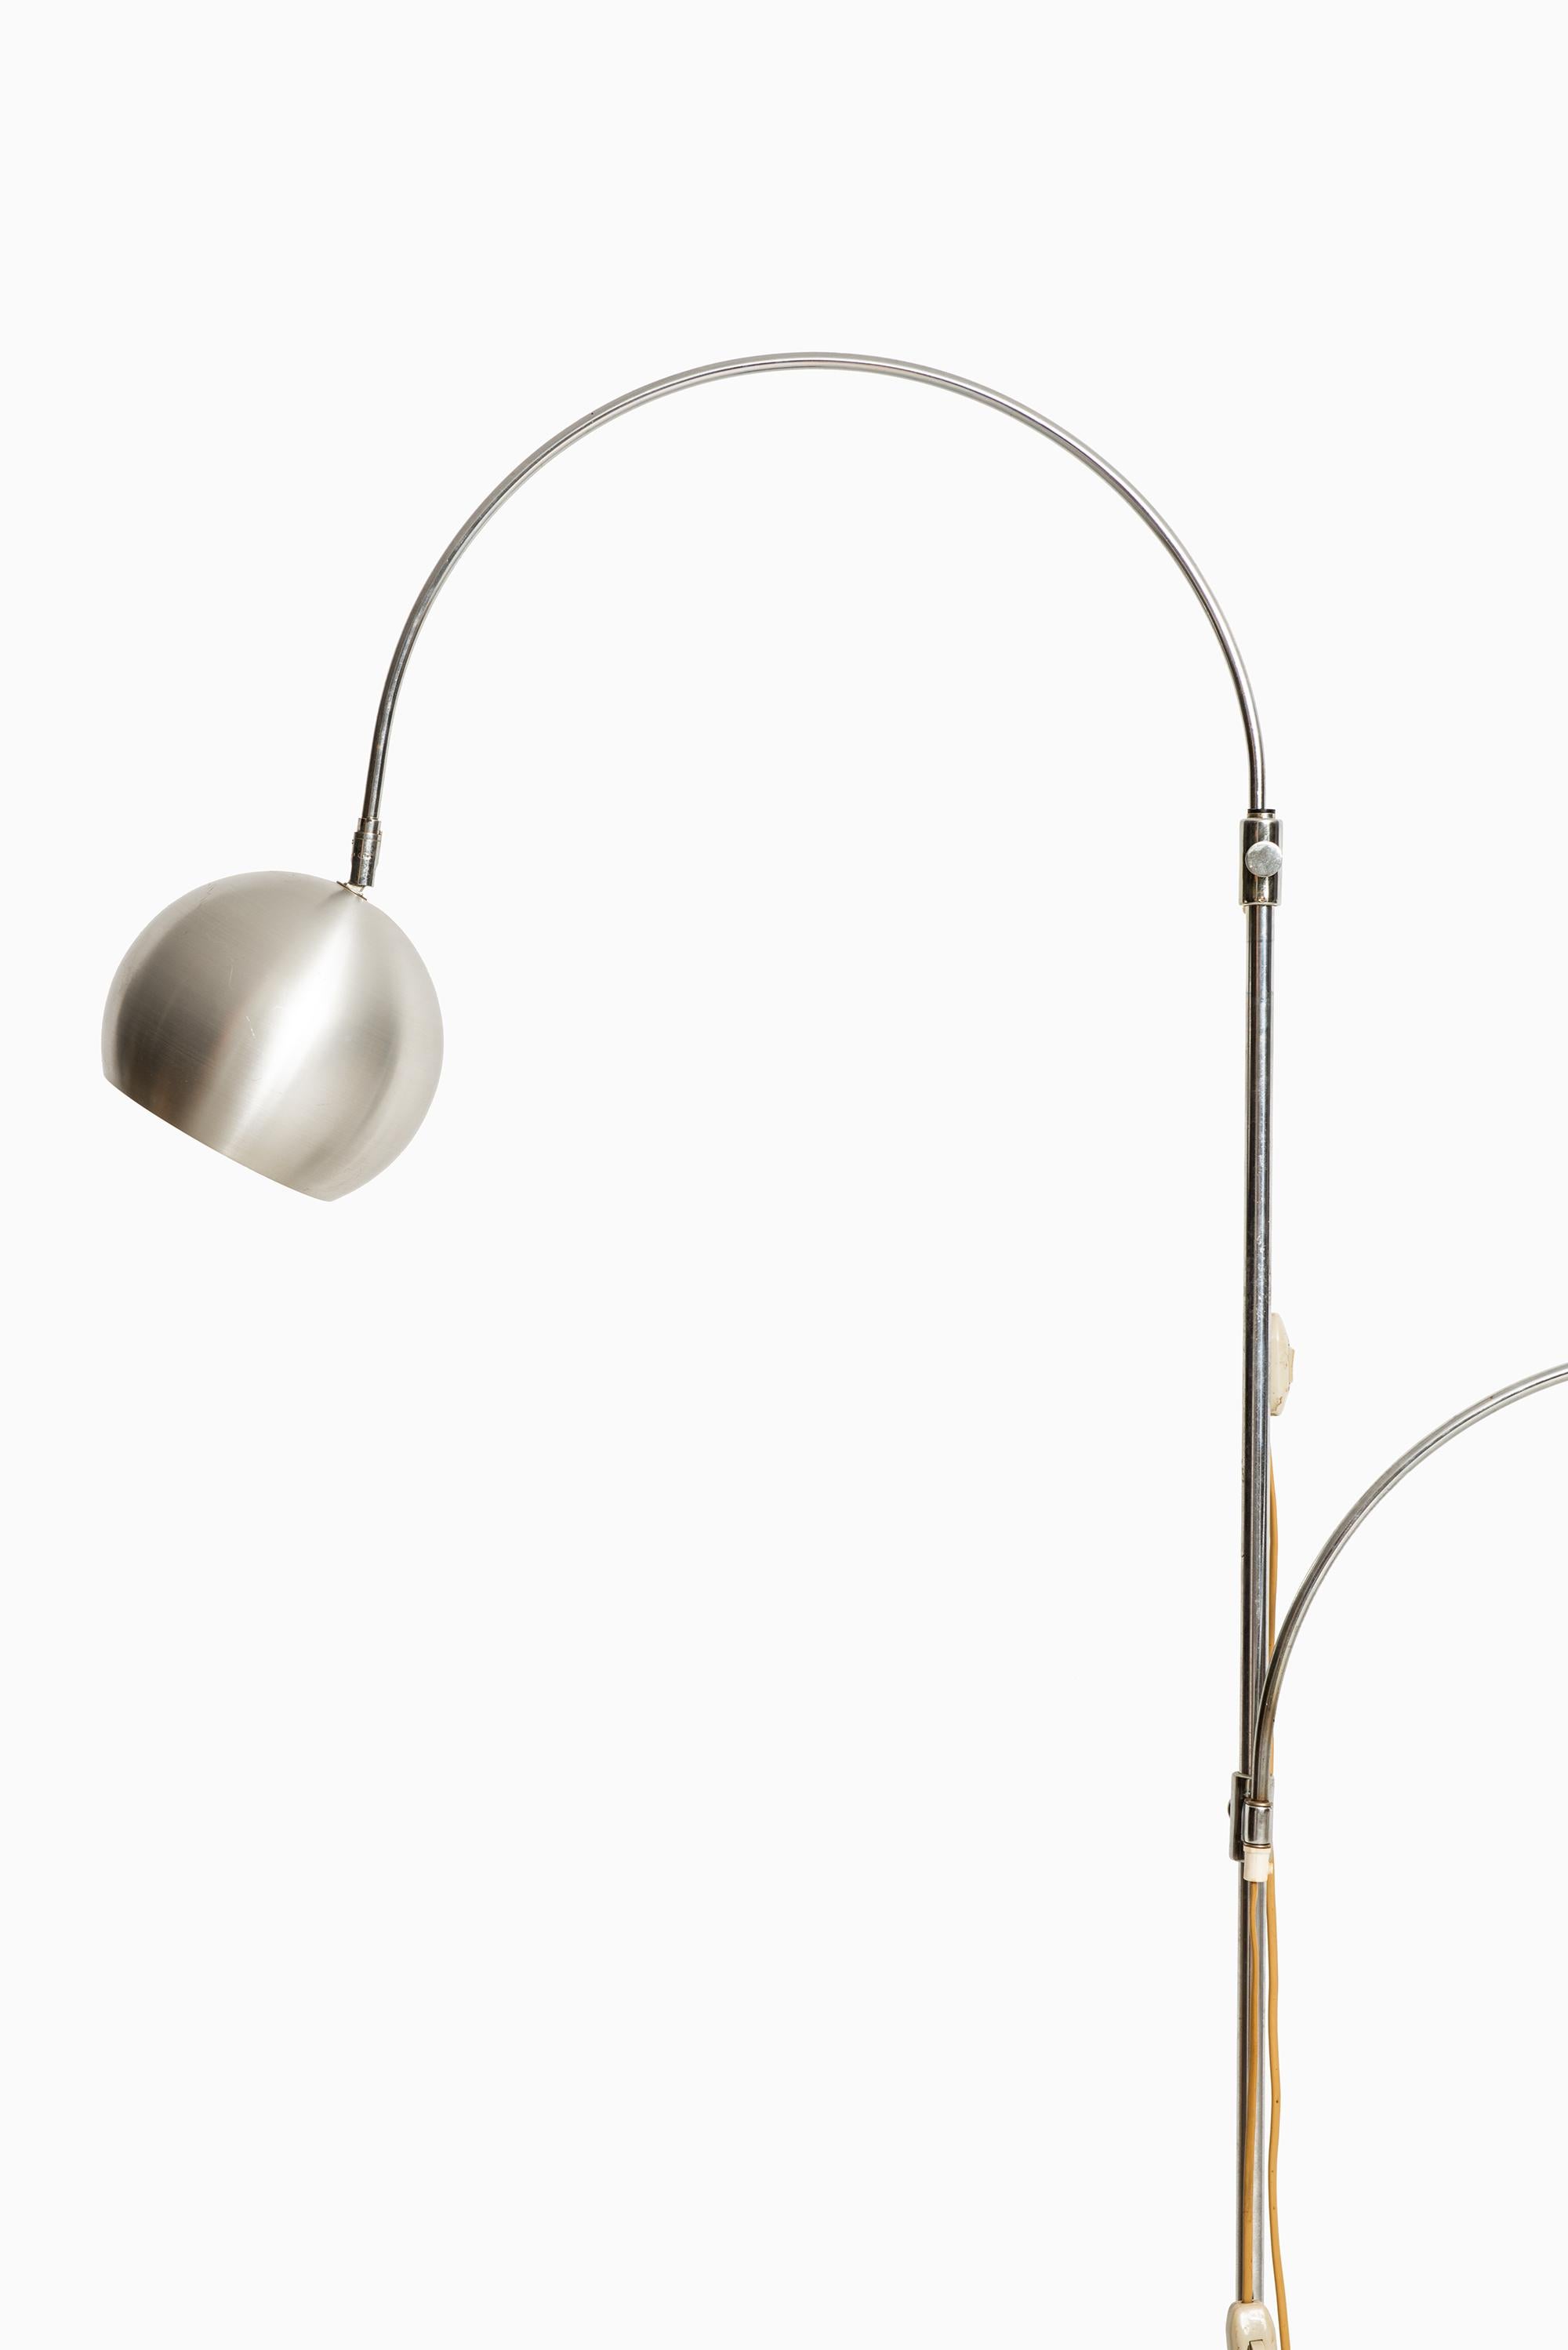 Rare floor lamp with 2 flexible and height adjustable arms by unknown designer. Produced in Italy.